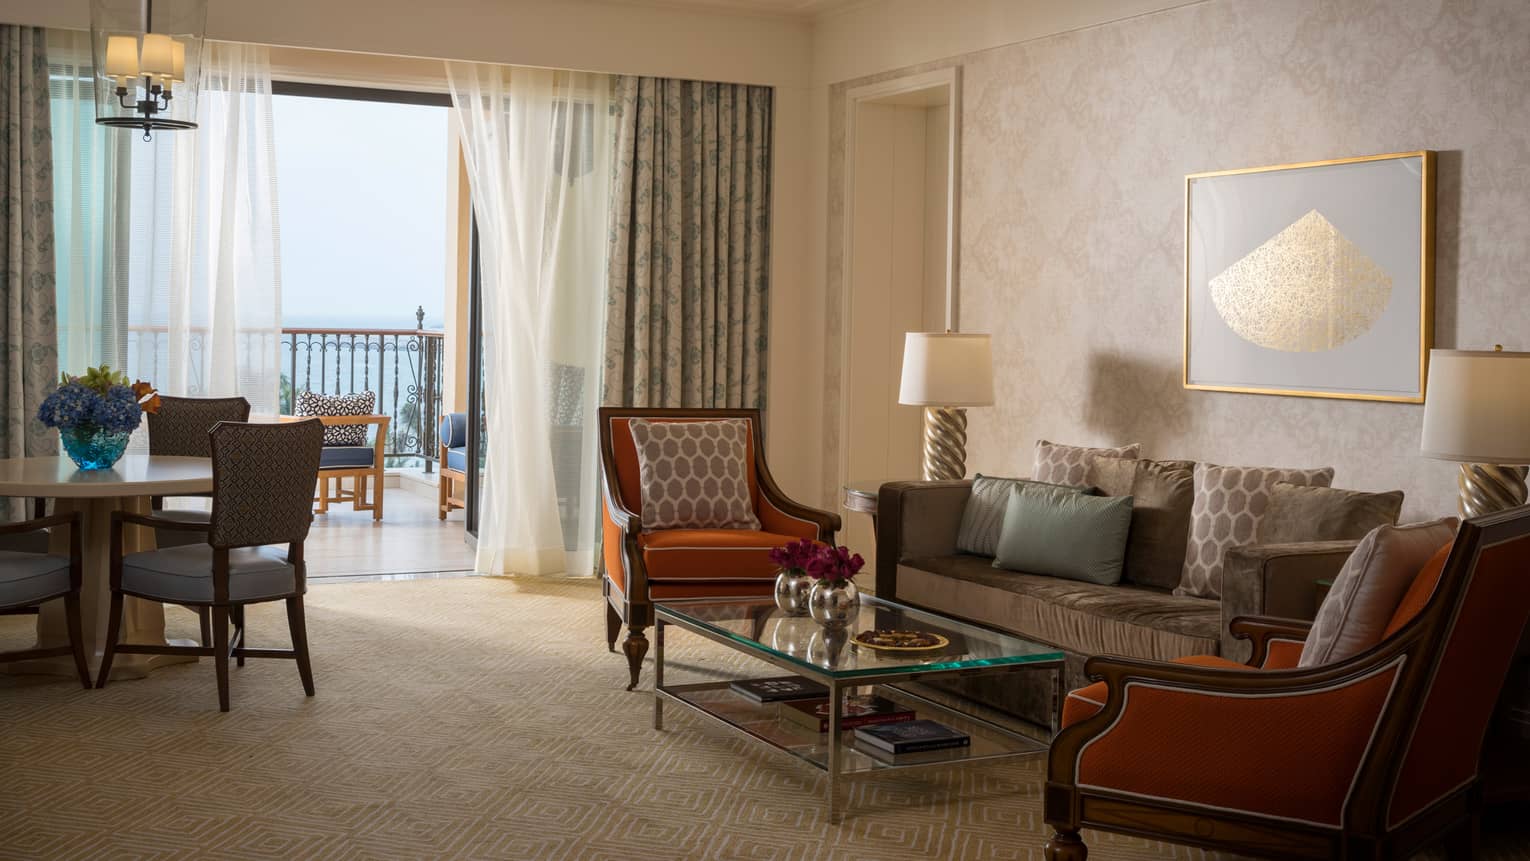 Jumeirah Sea-View Suite with large living space, orange and gold accents, white curtains